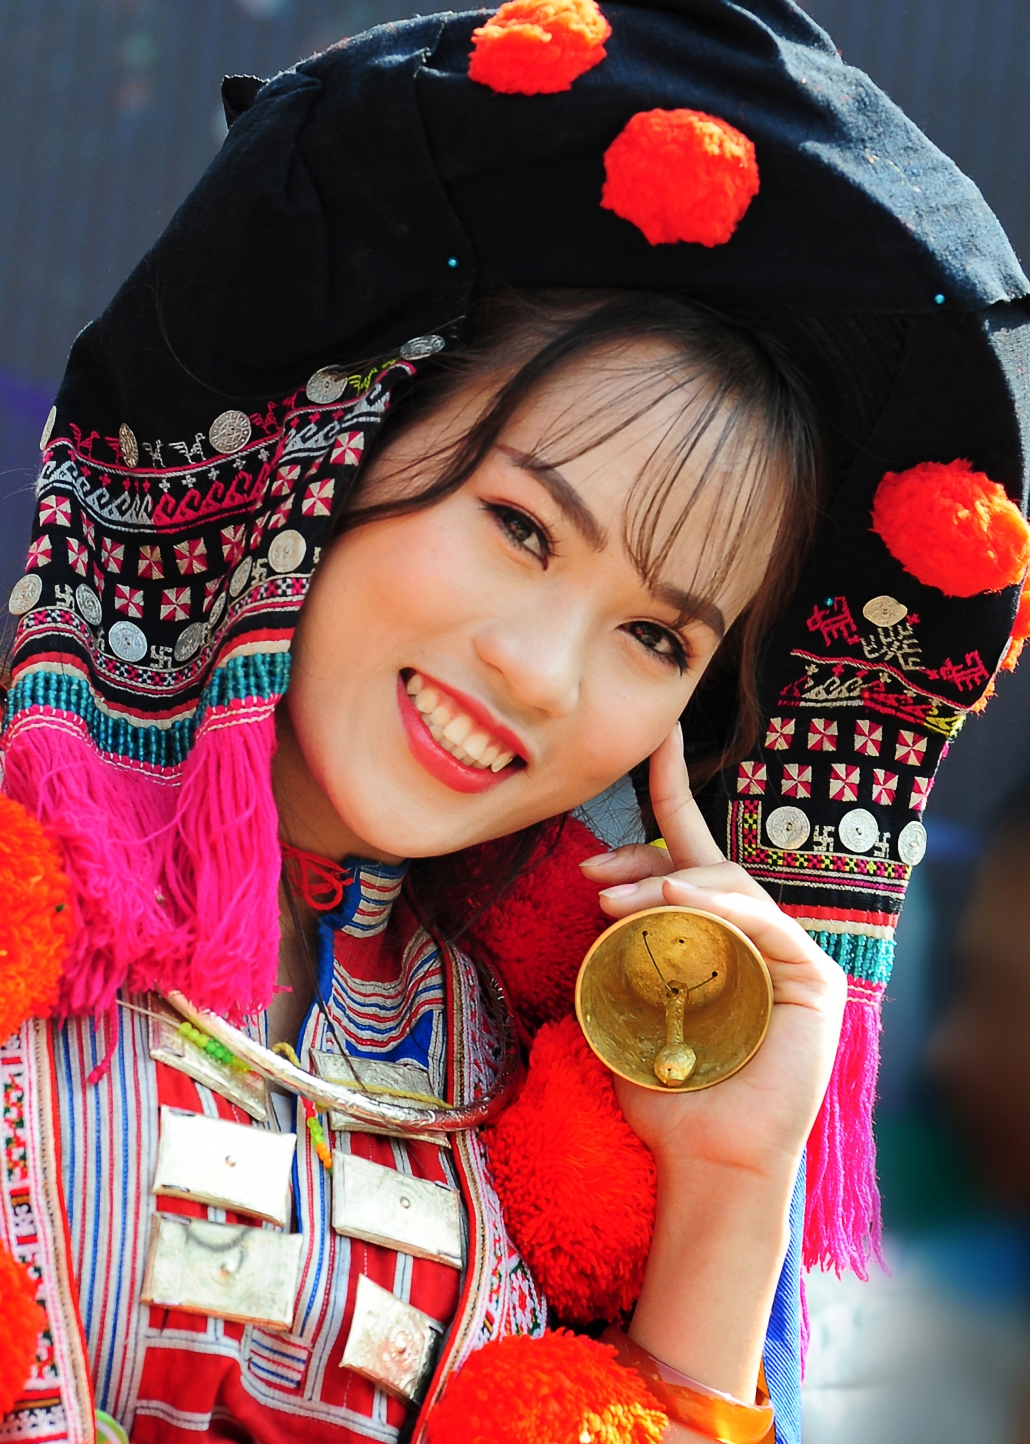 The beauty of girls in Phu Luong